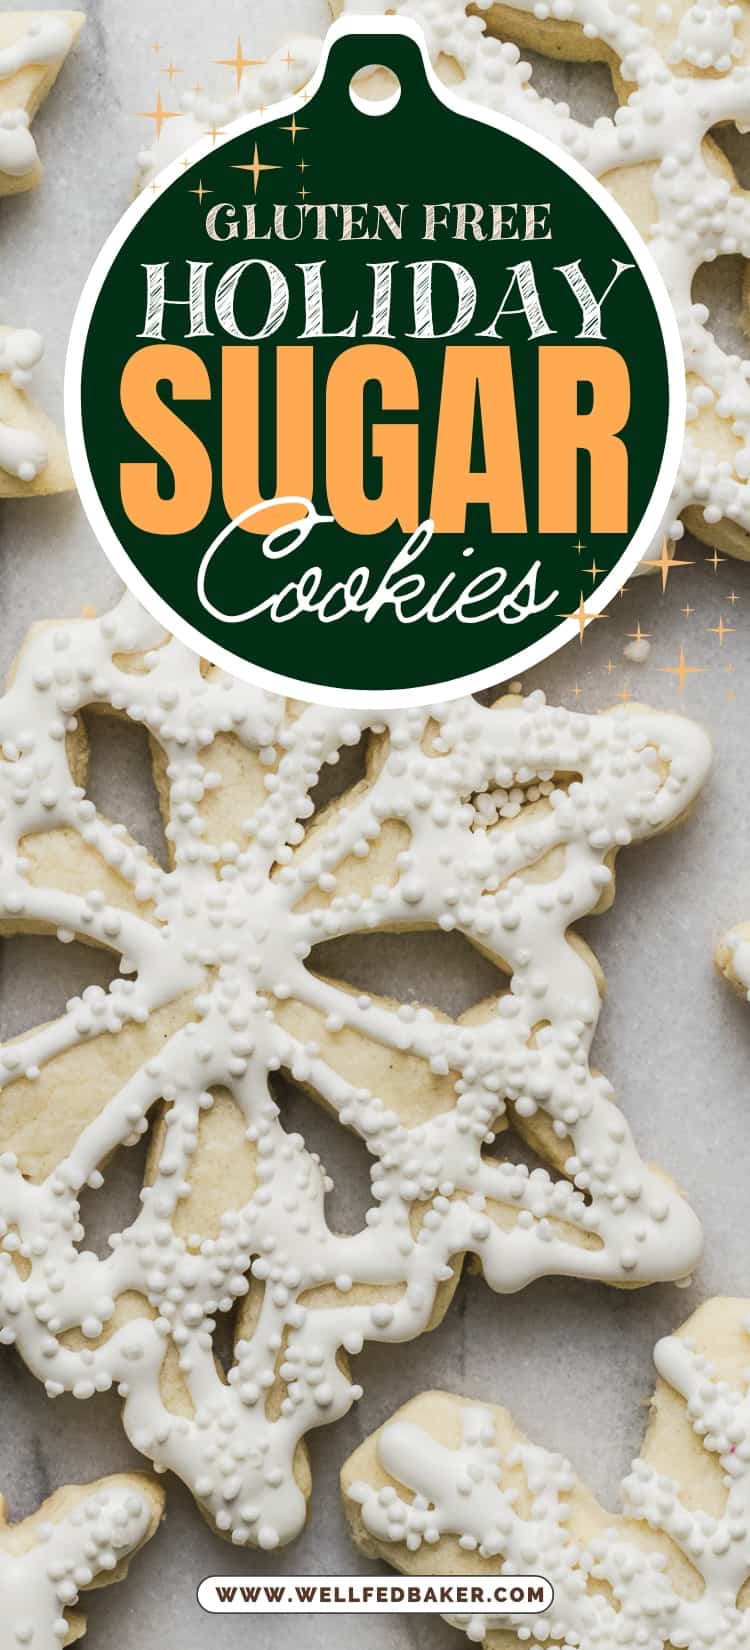 Pin for gluten free cut out sugar cookies.